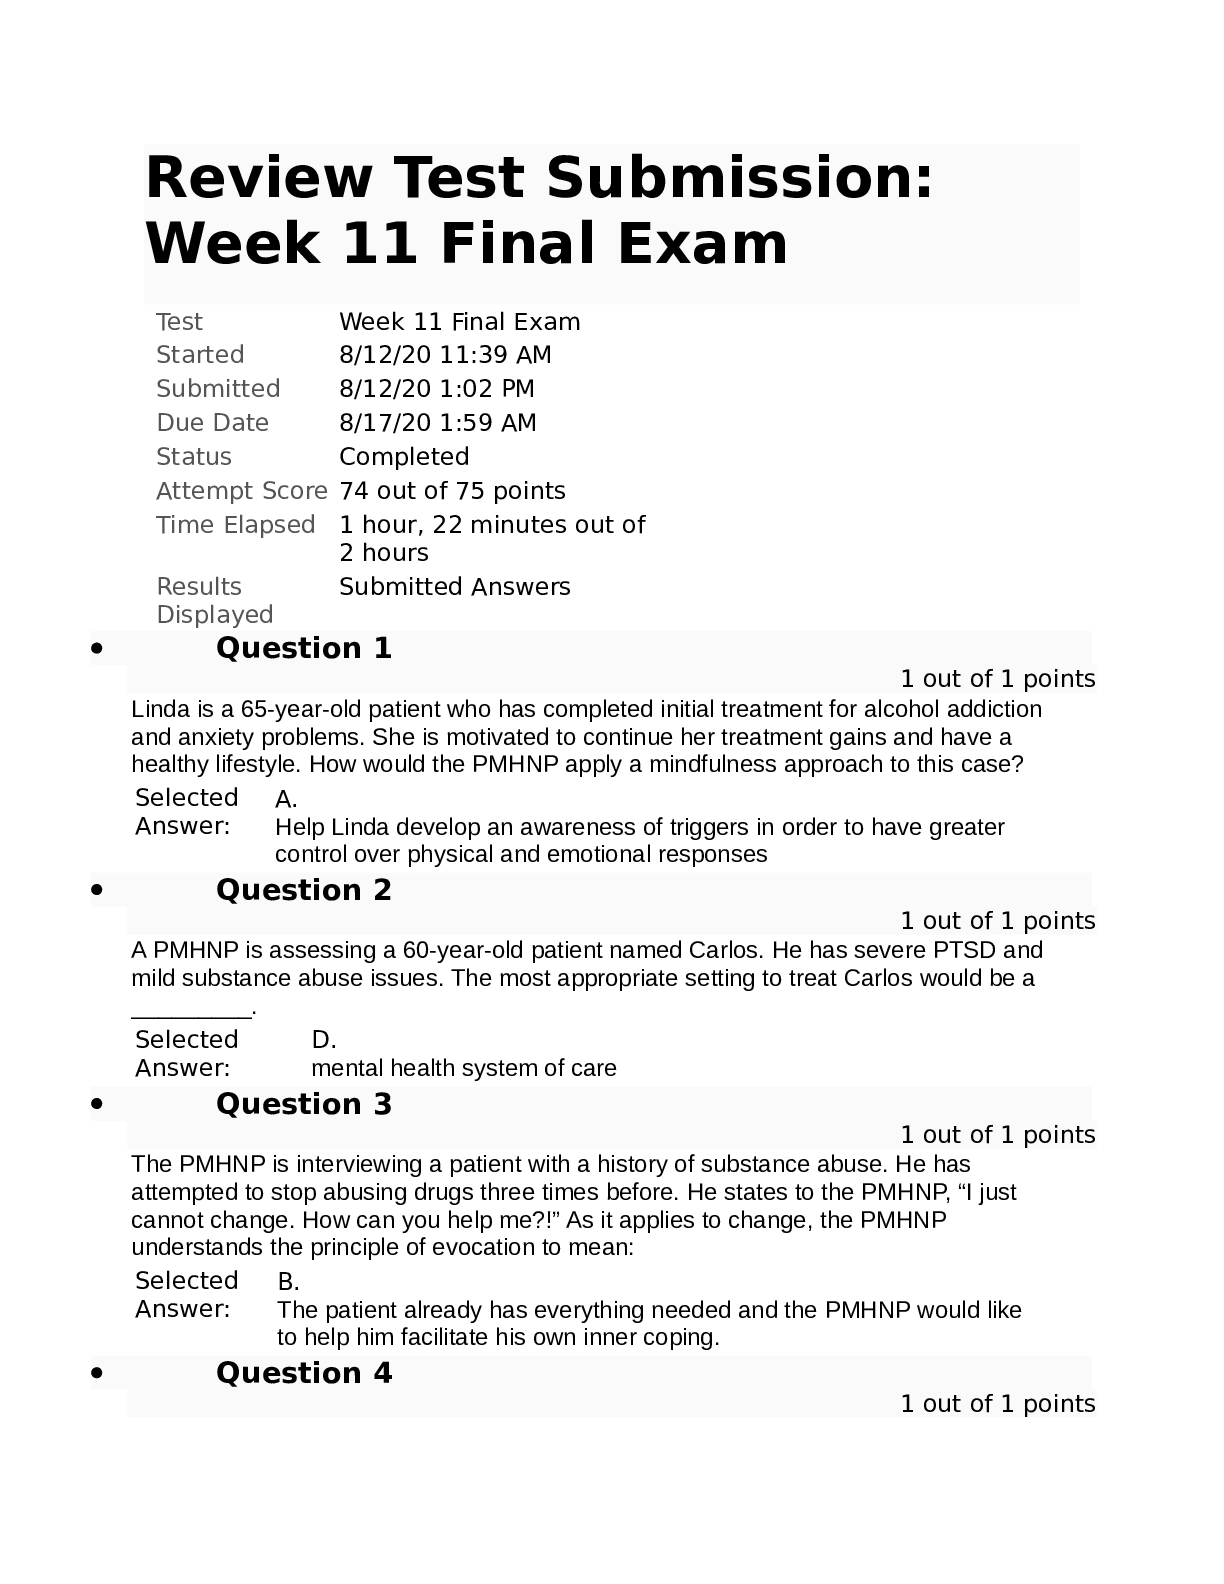 Walden University: NRNP 6640 Week 11 Final Exam with answers